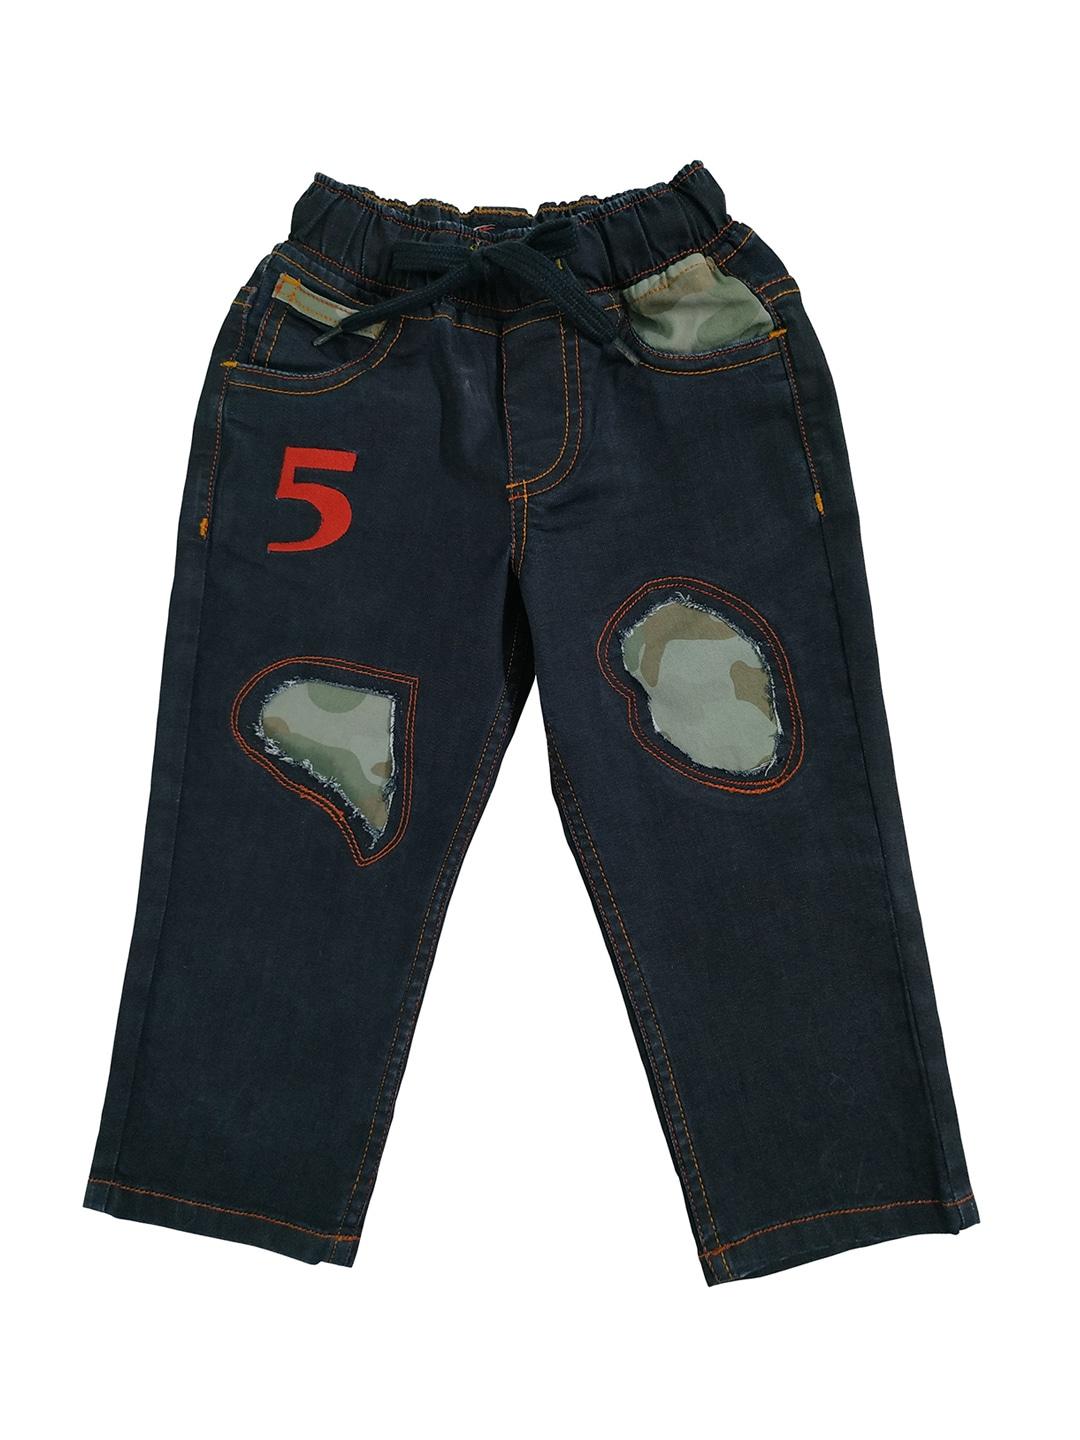 kiddopanti-boys-navy-blue-mid-rise-with-camouflage-patch-clean-look-regular-fit-jeans